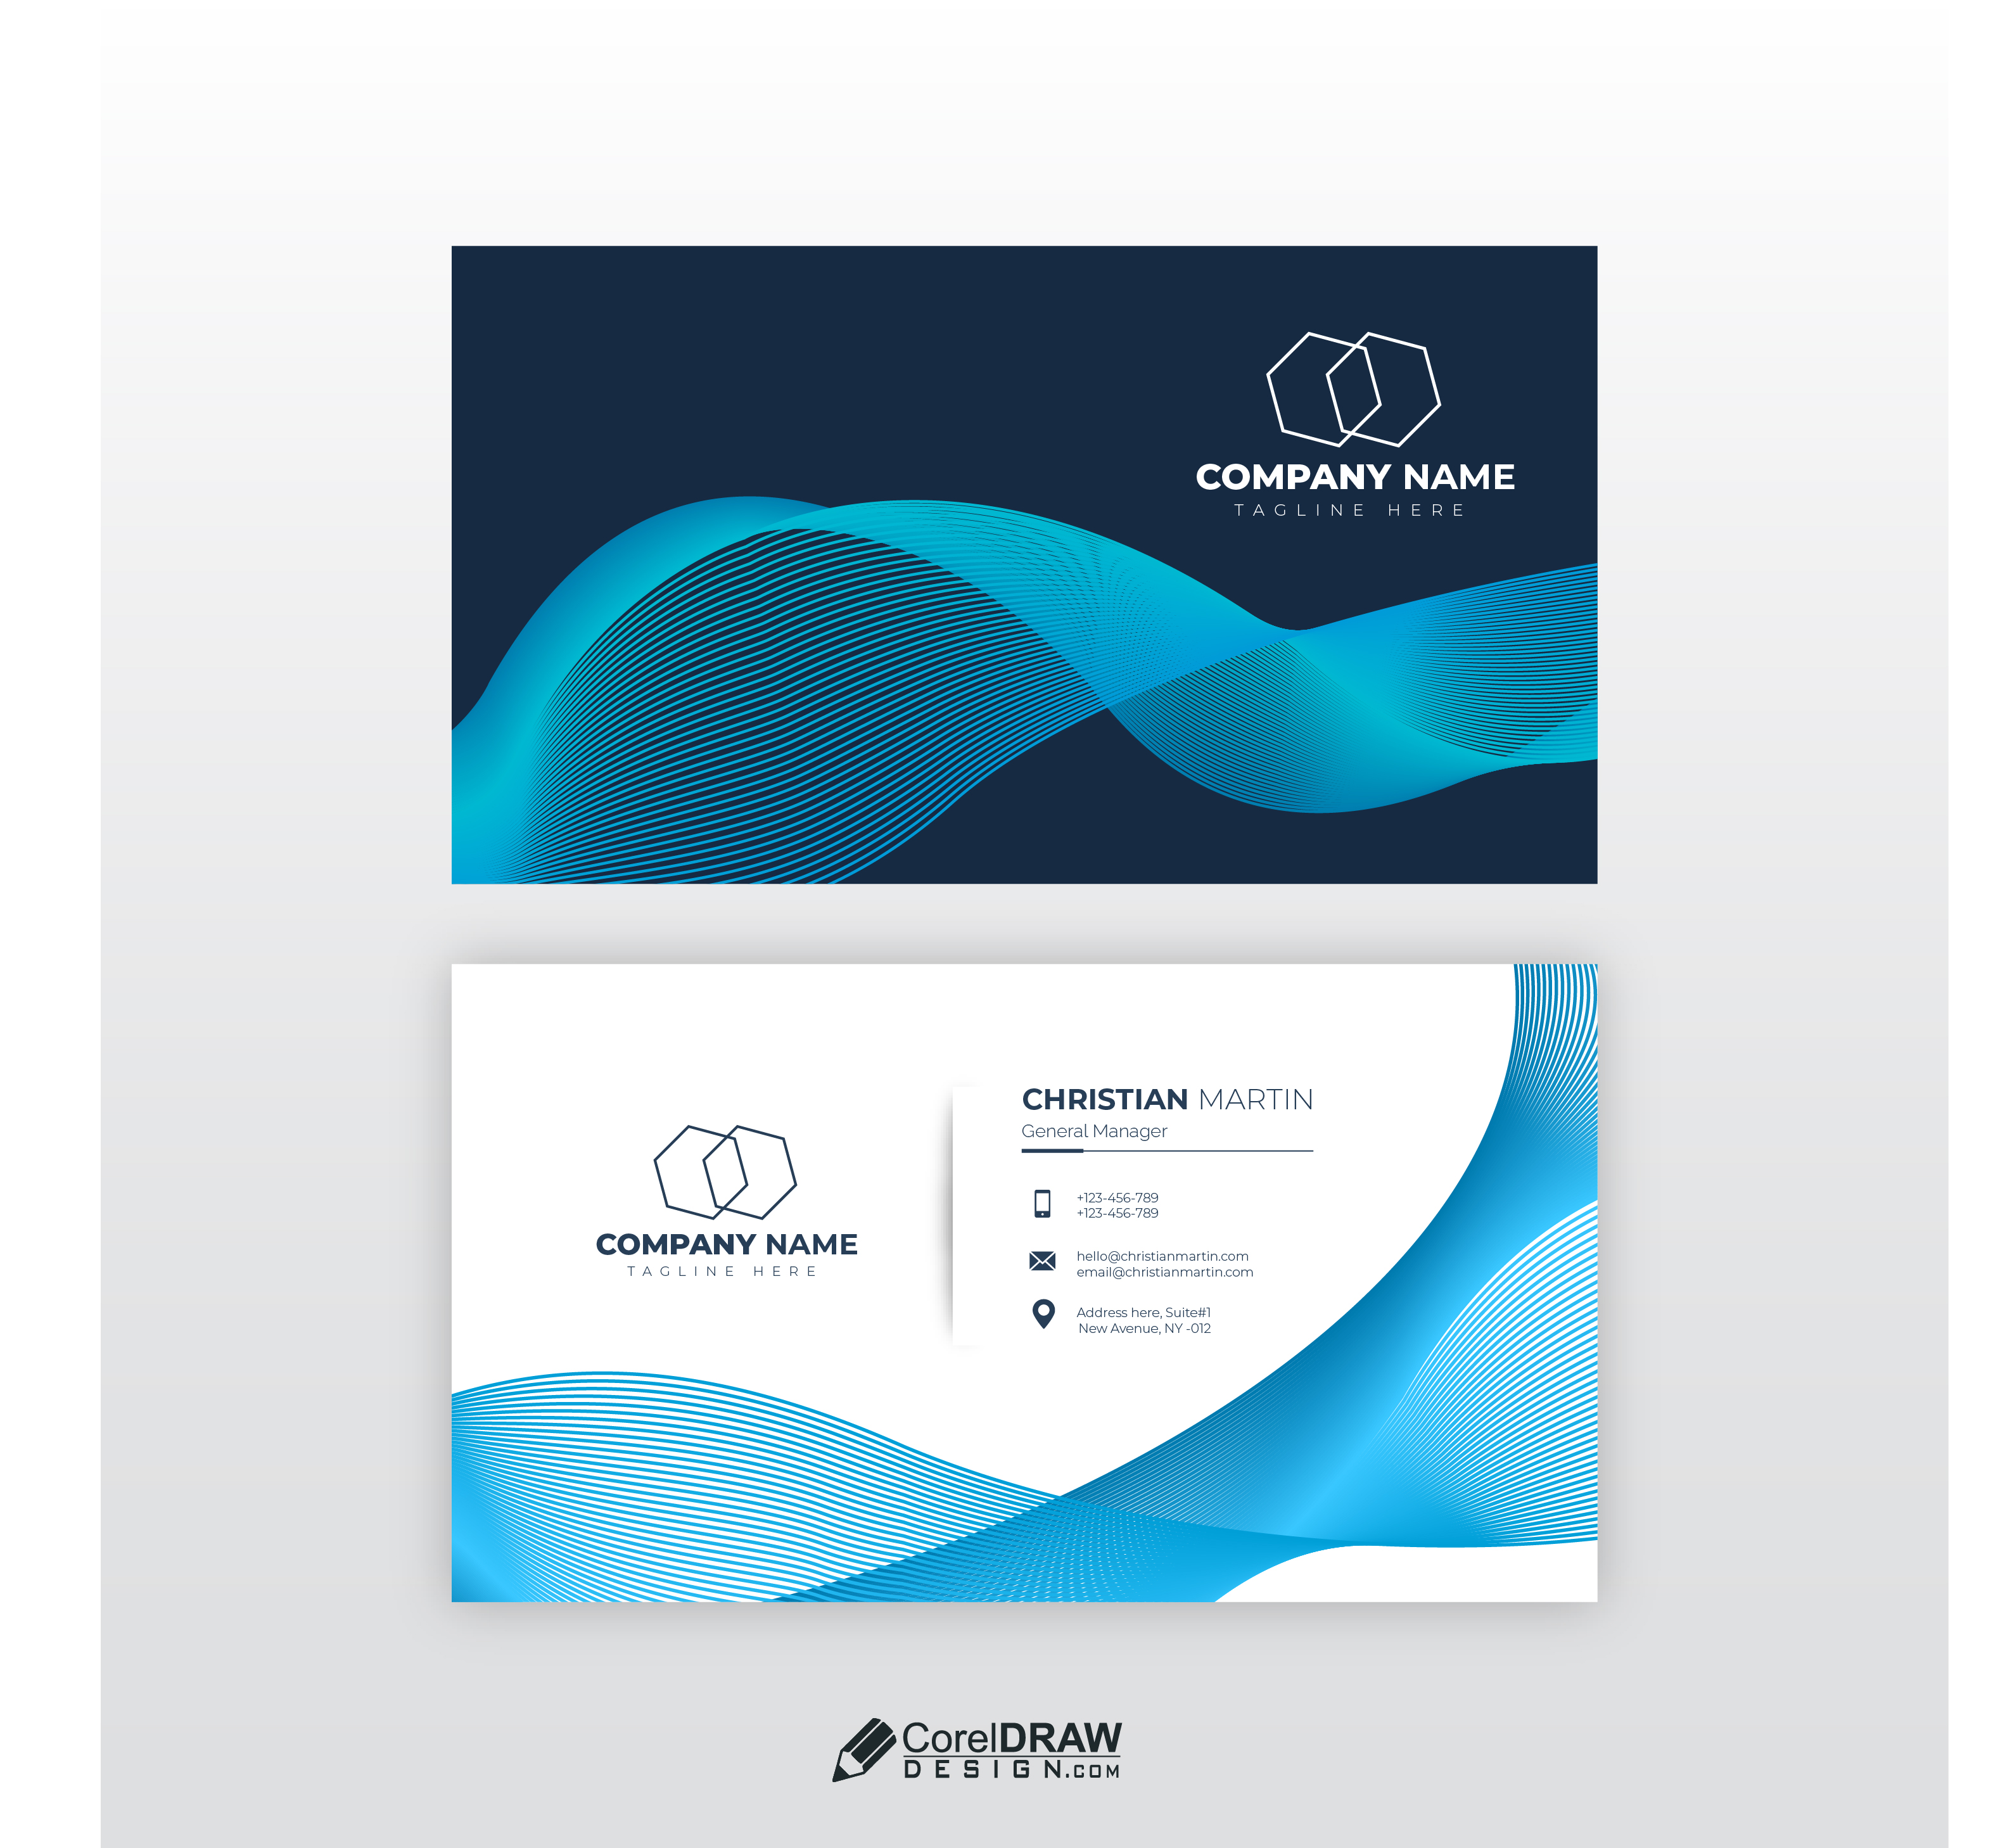 Abstract Premium Blue Corporate Business Card Vector Template